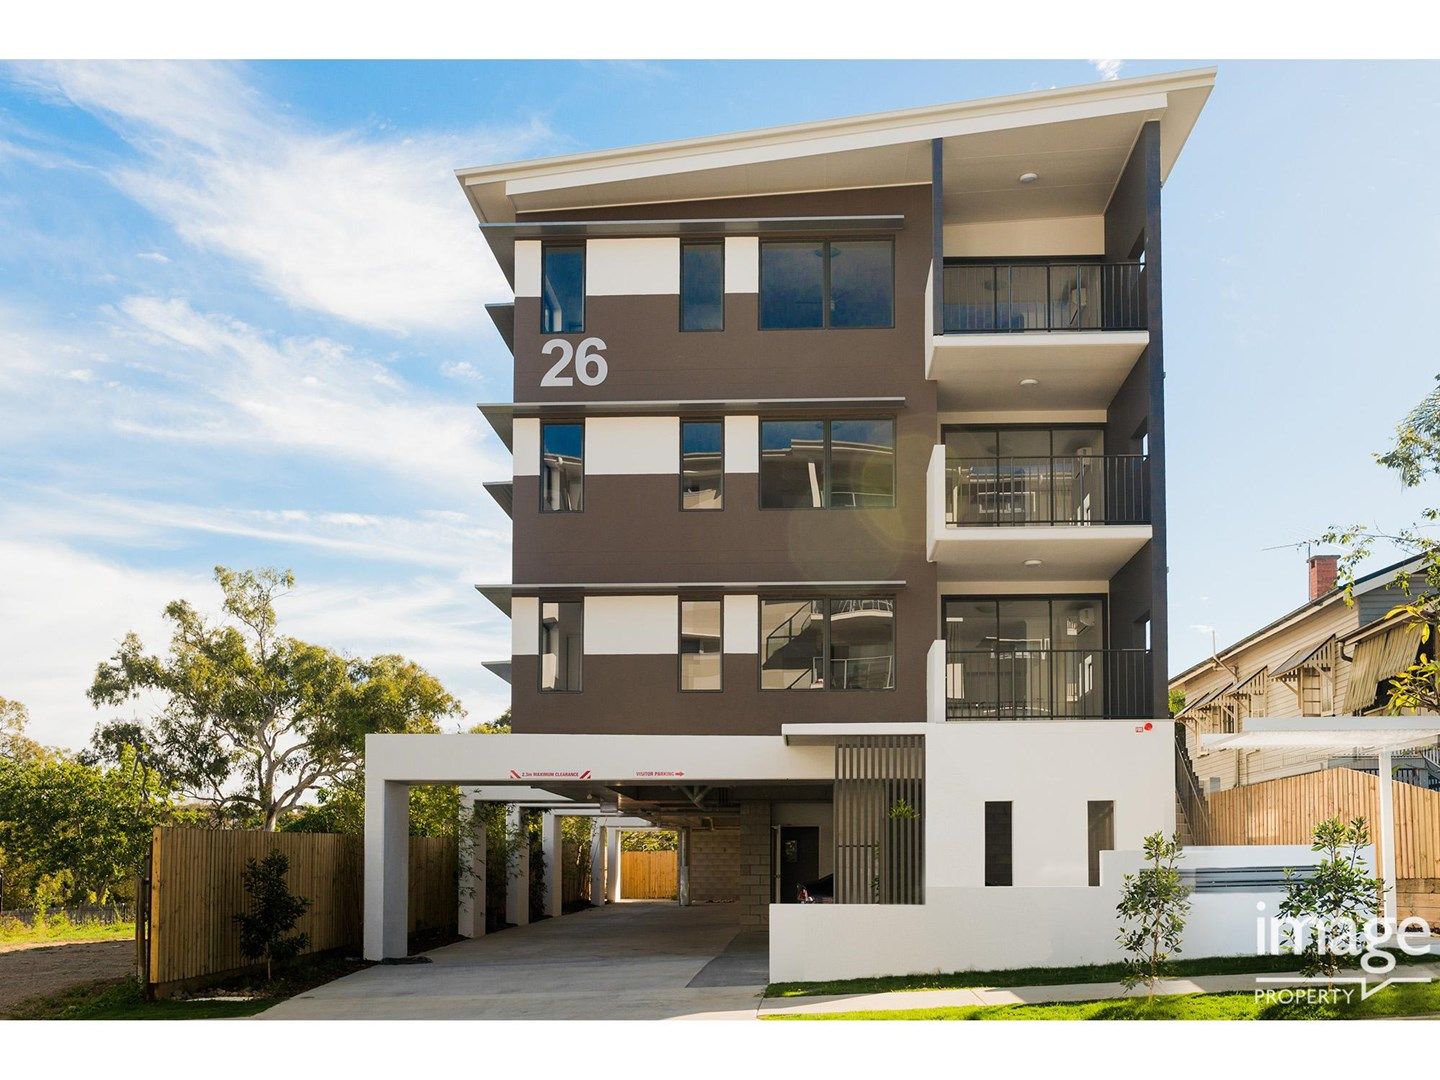 2 bedrooms Apartment / Unit / Flat in 8/26 Gallagher Terrace KEDRON QLD, 4031